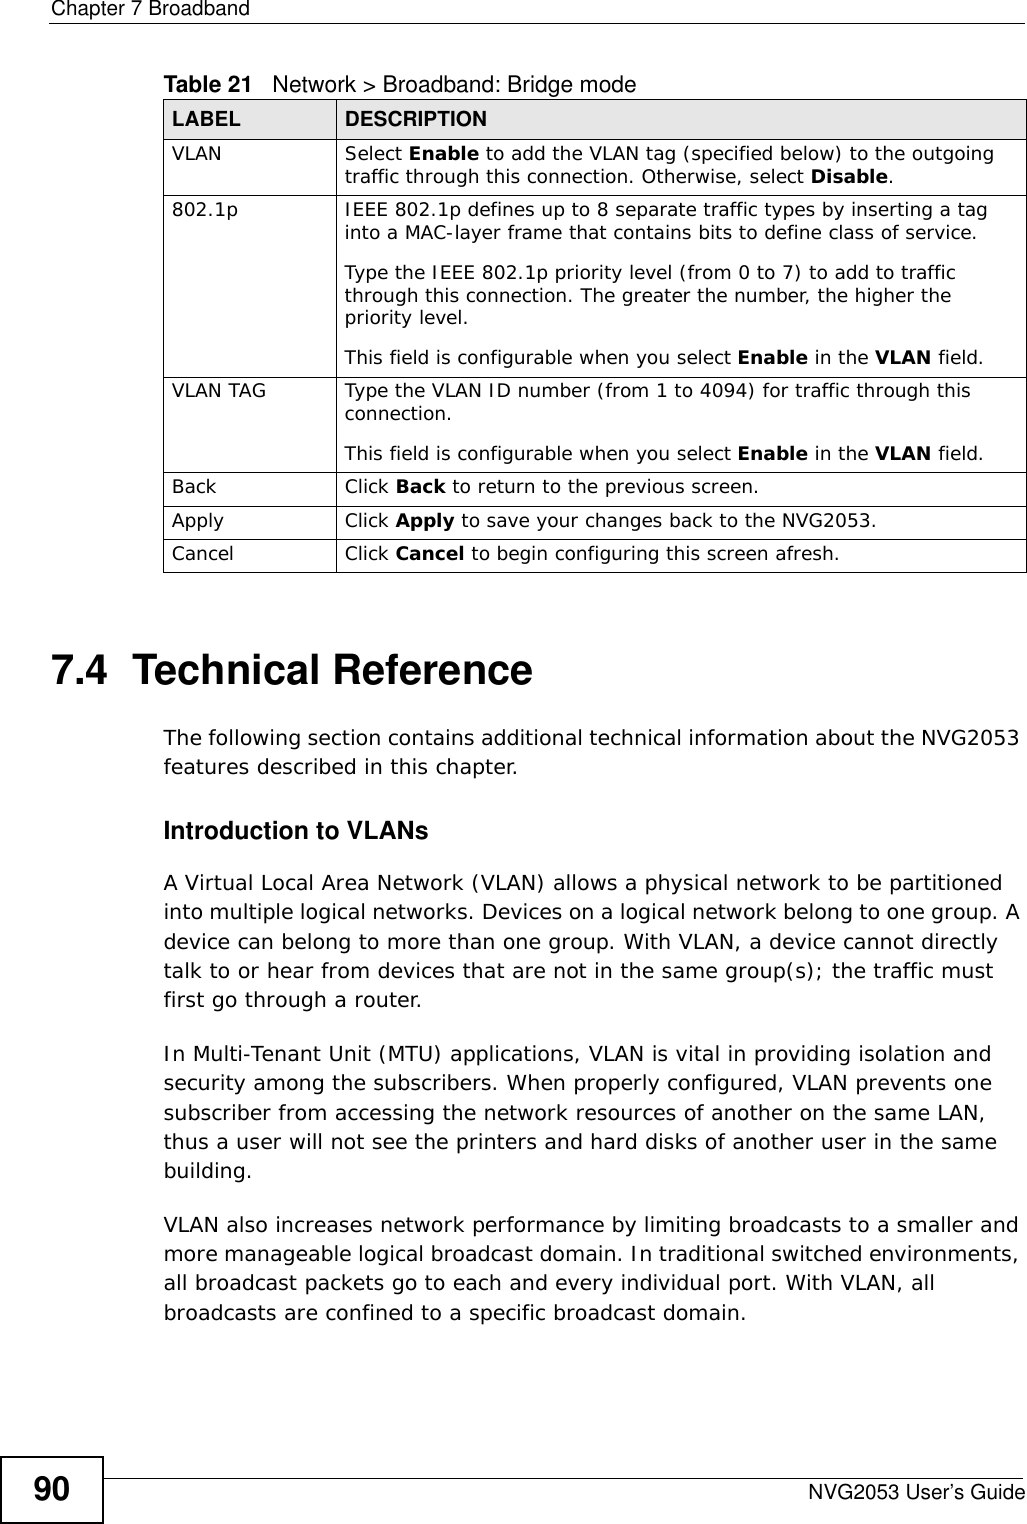 Chapter 7 BroadbandNVG2053 User’s Guide907.4  Technical ReferenceThe following section contains additional technical information about the NVG2053 features described in this chapter.Introduction to VLANs A Virtual Local Area Network (VLAN) allows a physical network to be partitioned into multiple logical networks. Devices on a logical network belong to one group. A device can belong to more than one group. With VLAN, a device cannot directly talk to or hear from devices that are not in the same group(s); the traffic must first go through a router.In Multi-Tenant Unit (MTU) applications, VLAN is vital in providing isolation and security among the subscribers. When properly configured, VLAN prevents one subscriber from accessing the network resources of another on the same LAN, thus a user will not see the printers and hard disks of another user in the same building. VLAN also increases network performance by limiting broadcasts to a smaller and more manageable logical broadcast domain. In traditional switched environments, all broadcast packets go to each and every individual port. With VLAN, all broadcasts are confined to a specific broadcast domain. VLAN Select Enable to add the VLAN tag (specified below) to the outgoing traffic through this connection. Otherwise, select Disable.802.1p IEEE 802.1p defines up to 8 separate traffic types by inserting a tag into a MAC-layer frame that contains bits to define class of service. Type the IEEE 802.1p priority level (from 0 to 7) to add to traffic through this connection. The greater the number, the higher the priority level.This field is configurable when you select Enable in the VLAN field.VLAN TAG Type the VLAN ID number (from 1 to 4094) for traffic through this connection.This field is configurable when you select Enable in the VLAN field.Back Click Back to return to the previous screen.Apply Click Apply to save your changes back to the NVG2053.Cancel Click Cancel to begin configuring this screen afresh.Table 21   Network &gt; Broadband: Bridge modeLABEL DESCRIPTION